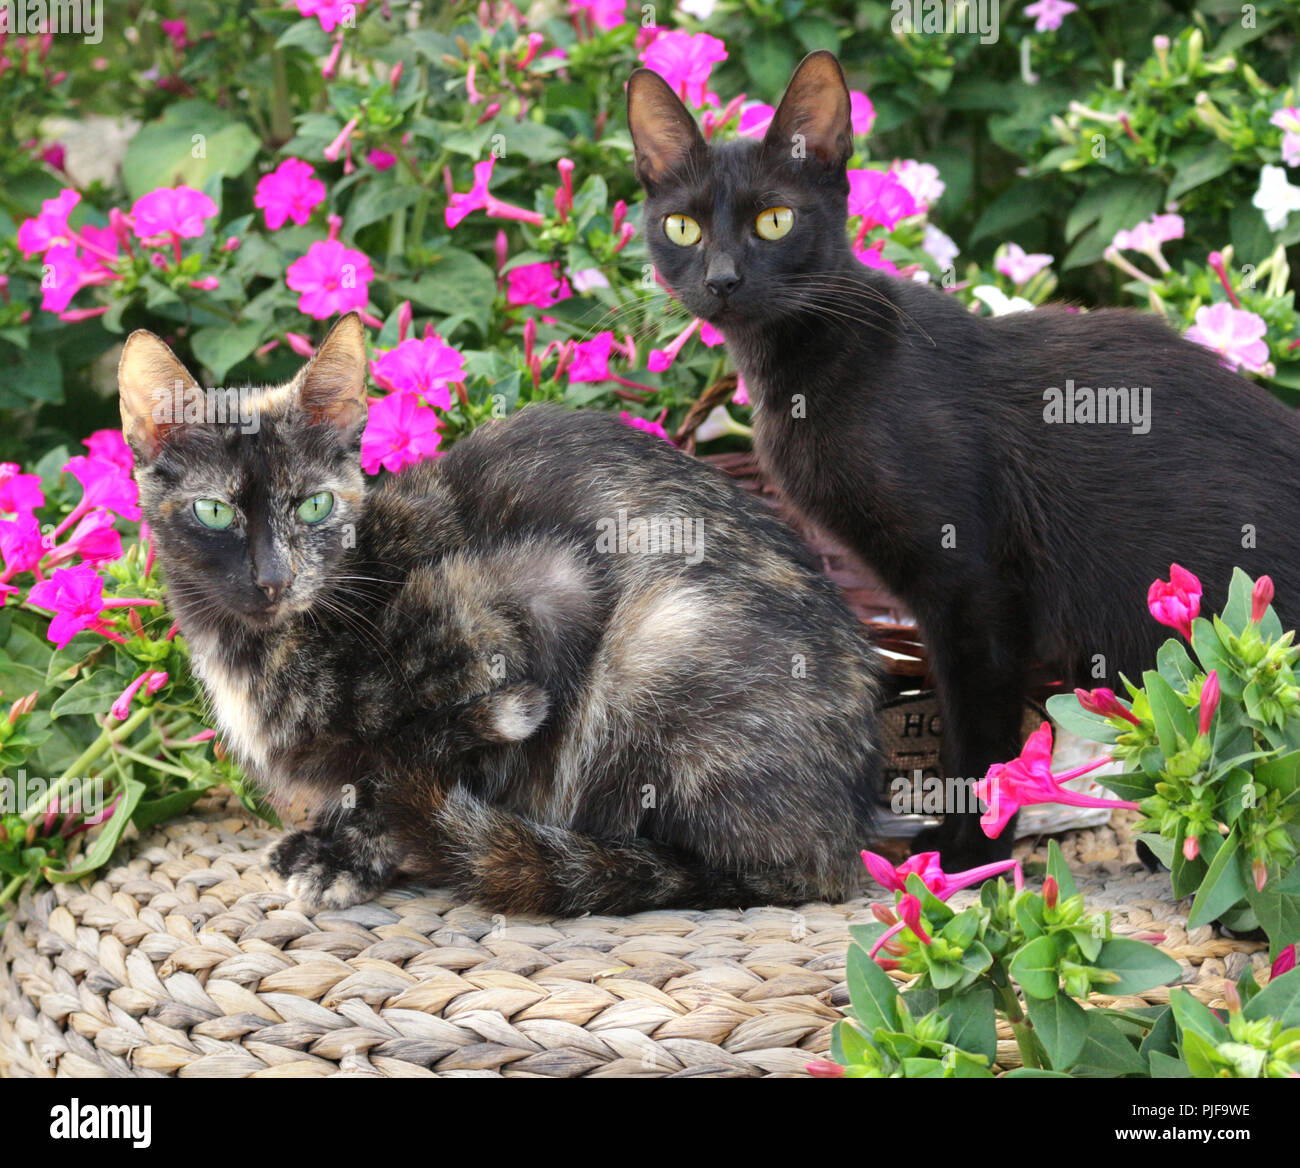 Two domestic cats, tortie and black, between flowers Stock Photo